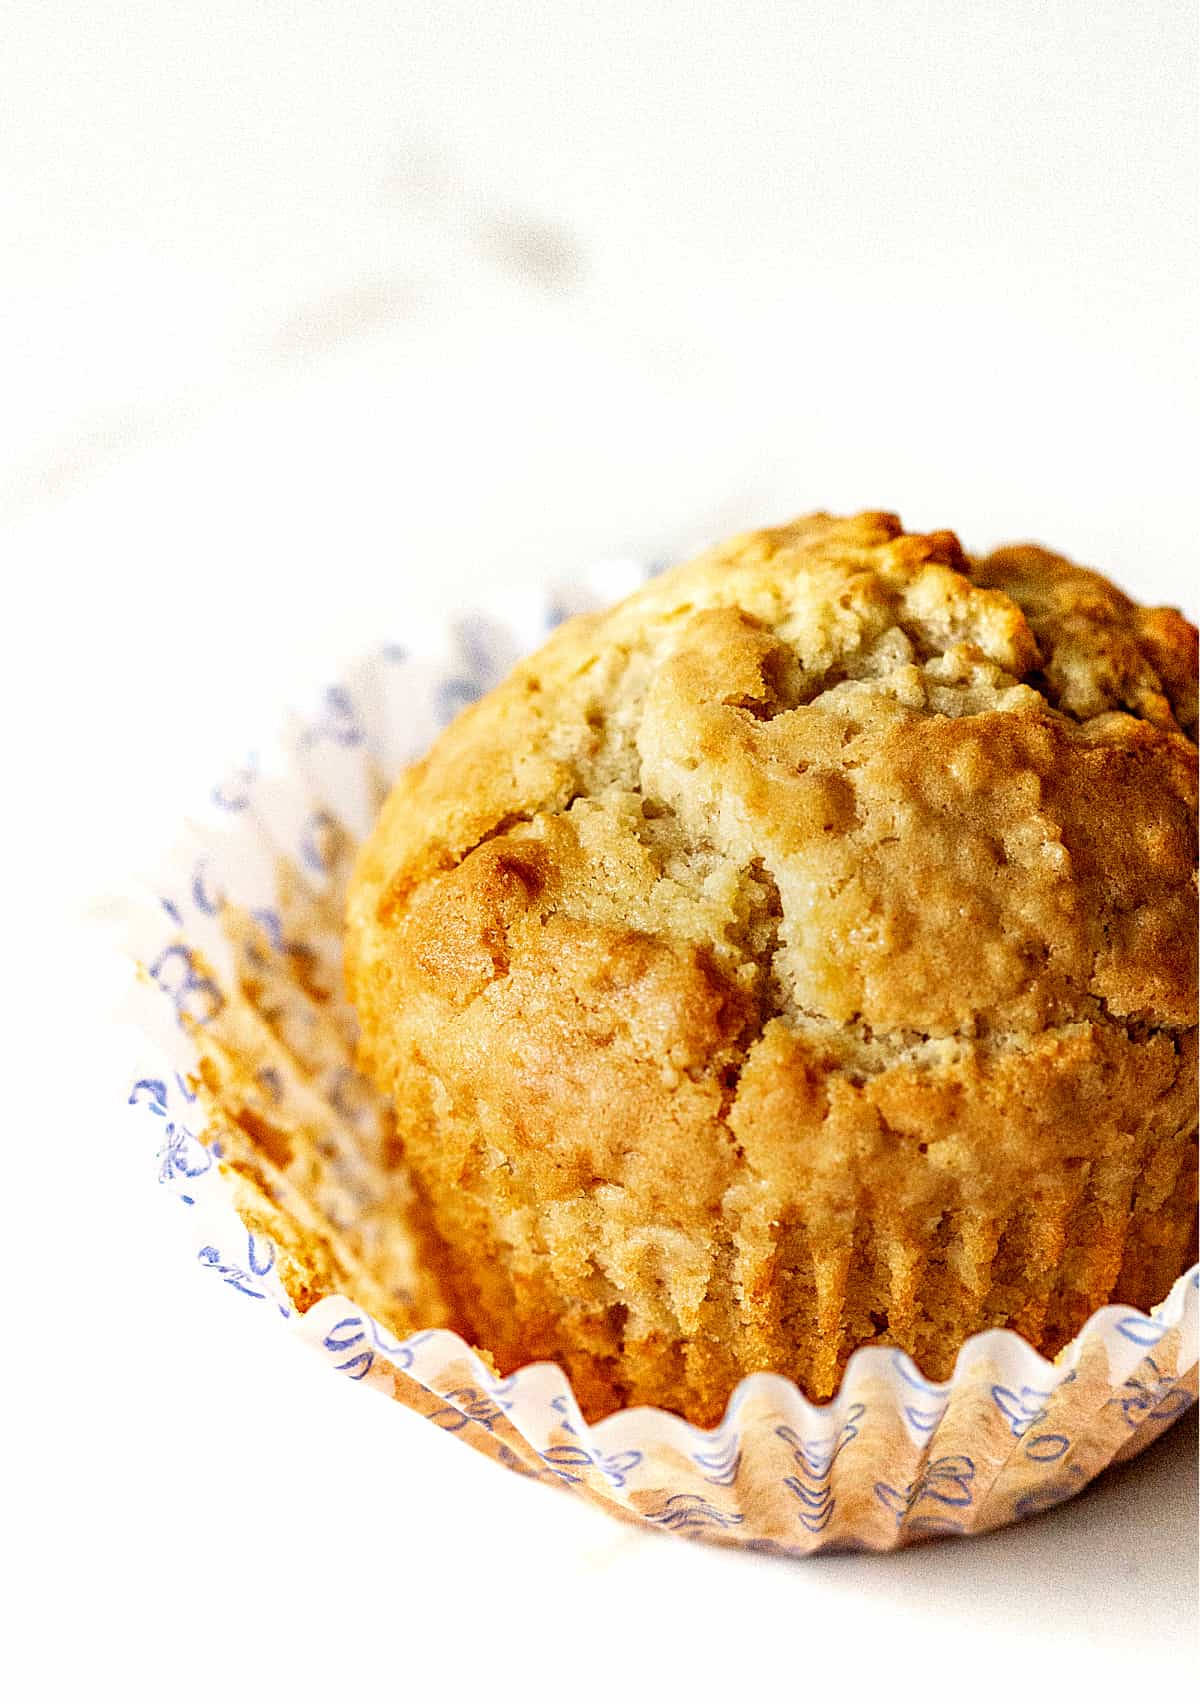 Single golden muffin on a white surface, opened paper cup